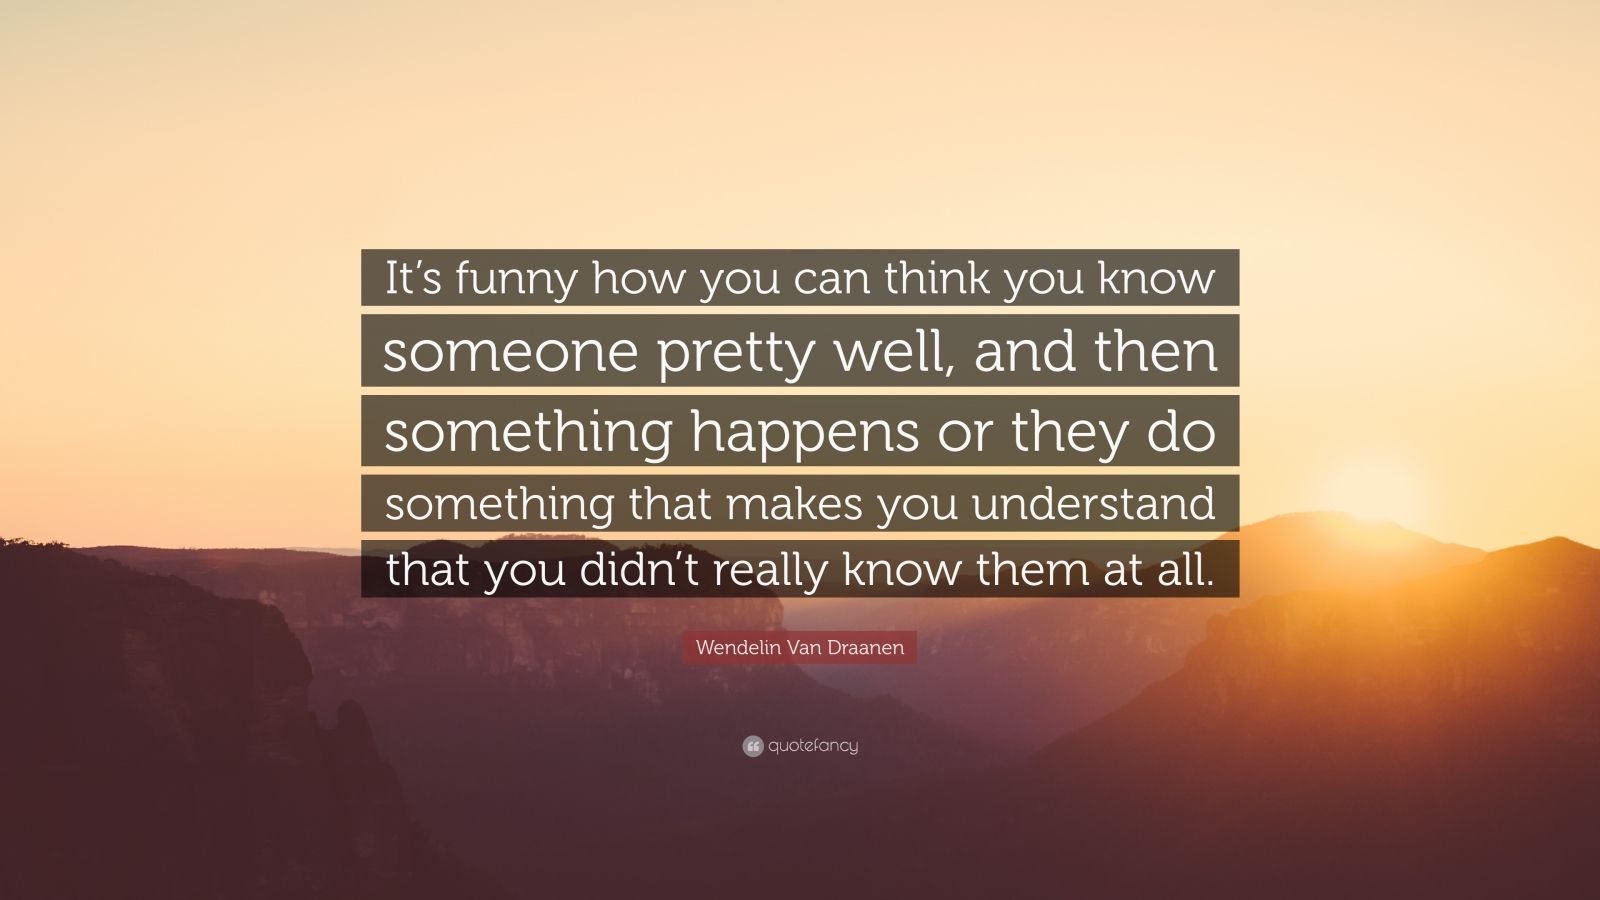 Wendelin Van Draanen Quote It S Funny How You Can Think You Know Someone Pretty Well And Then Something Happens Or They Do Something That Makes Yo